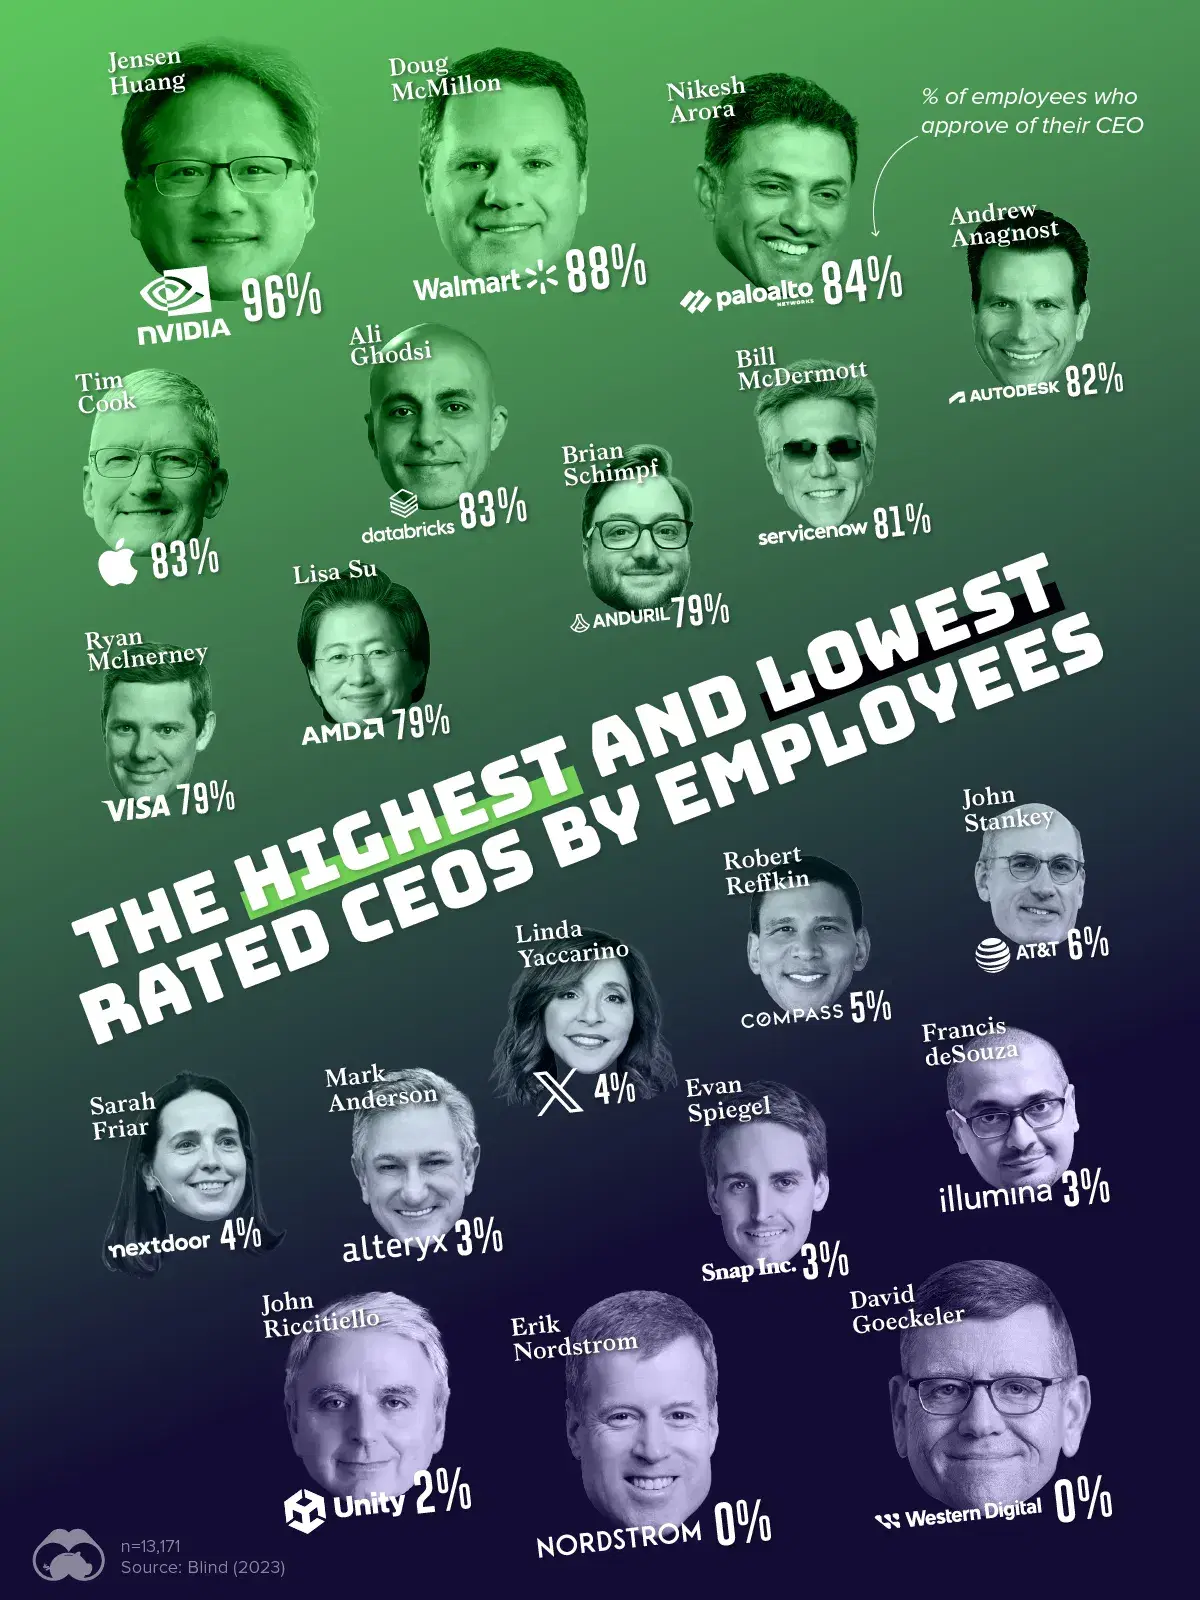 NVIDIA's Jensen Huang Is the Most Liked CEO by Employees 🤩